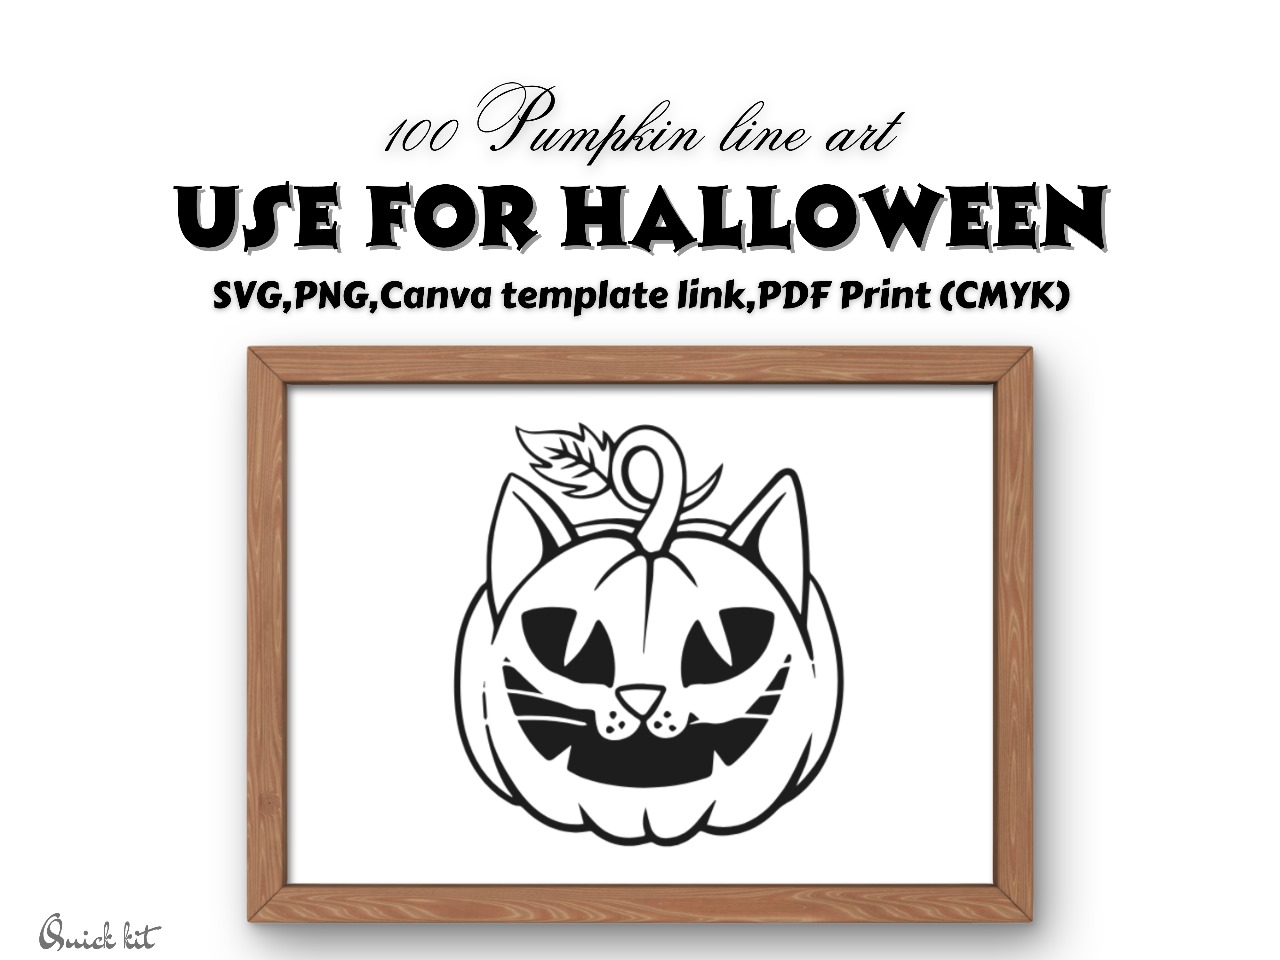 Elevate Your Halloween Creations with Our Pumpkin Line Art Bundle